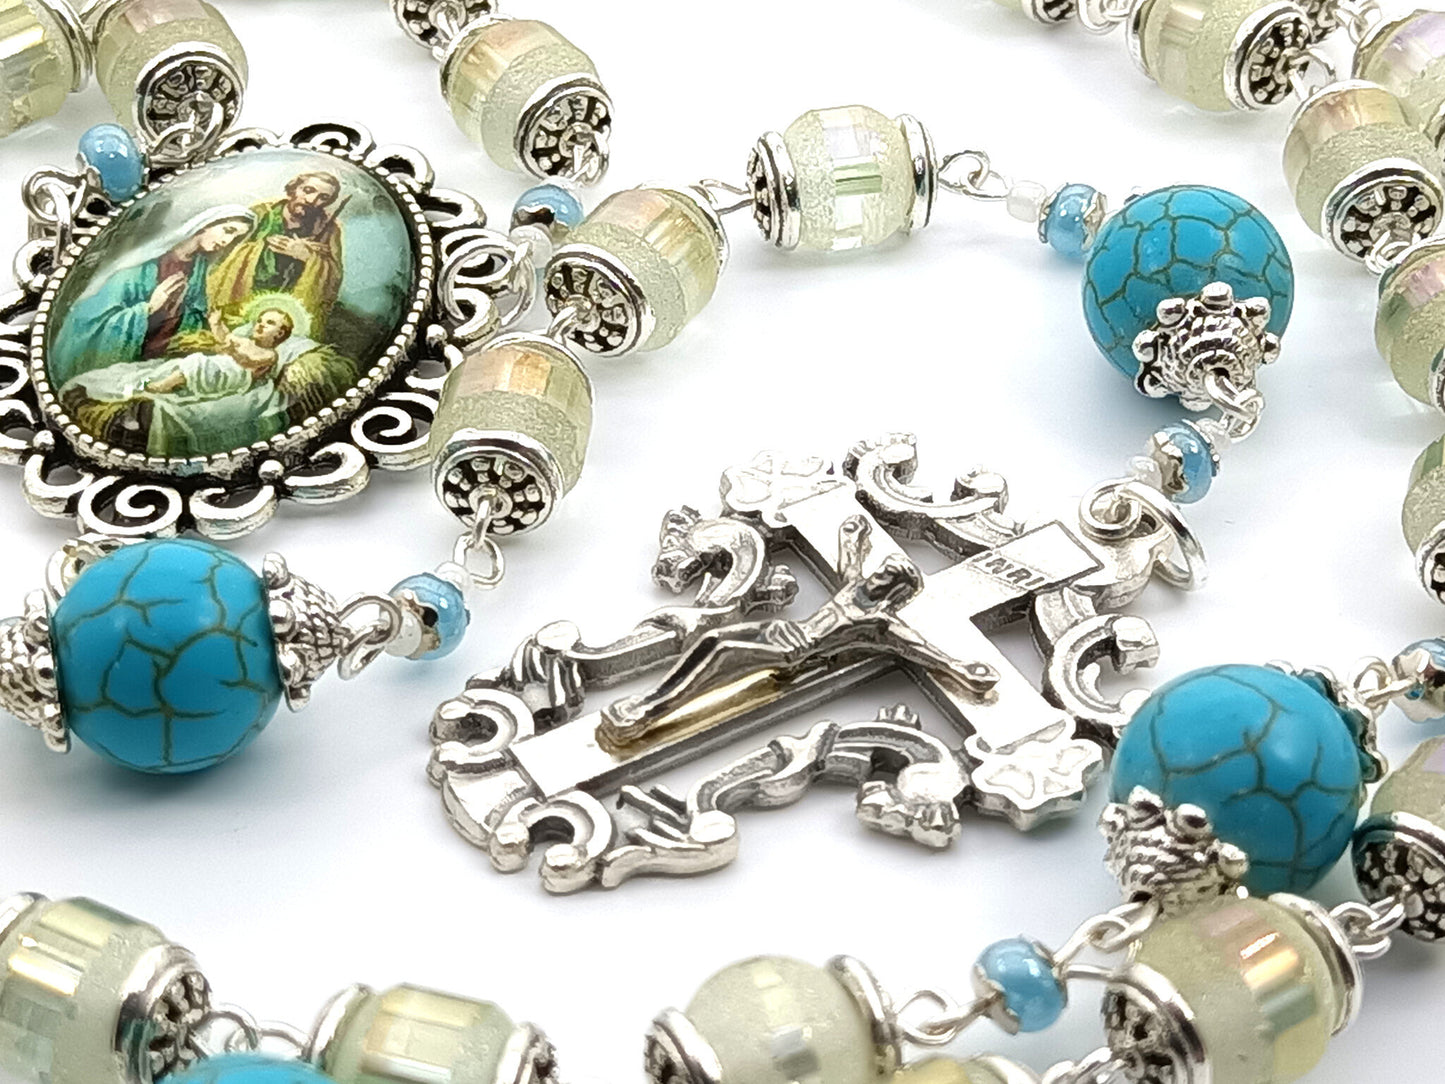 Holy Family unique rosary beads with frosted glass beads, blue gemstone pater beads, silver crucifix and picture centre medal. 